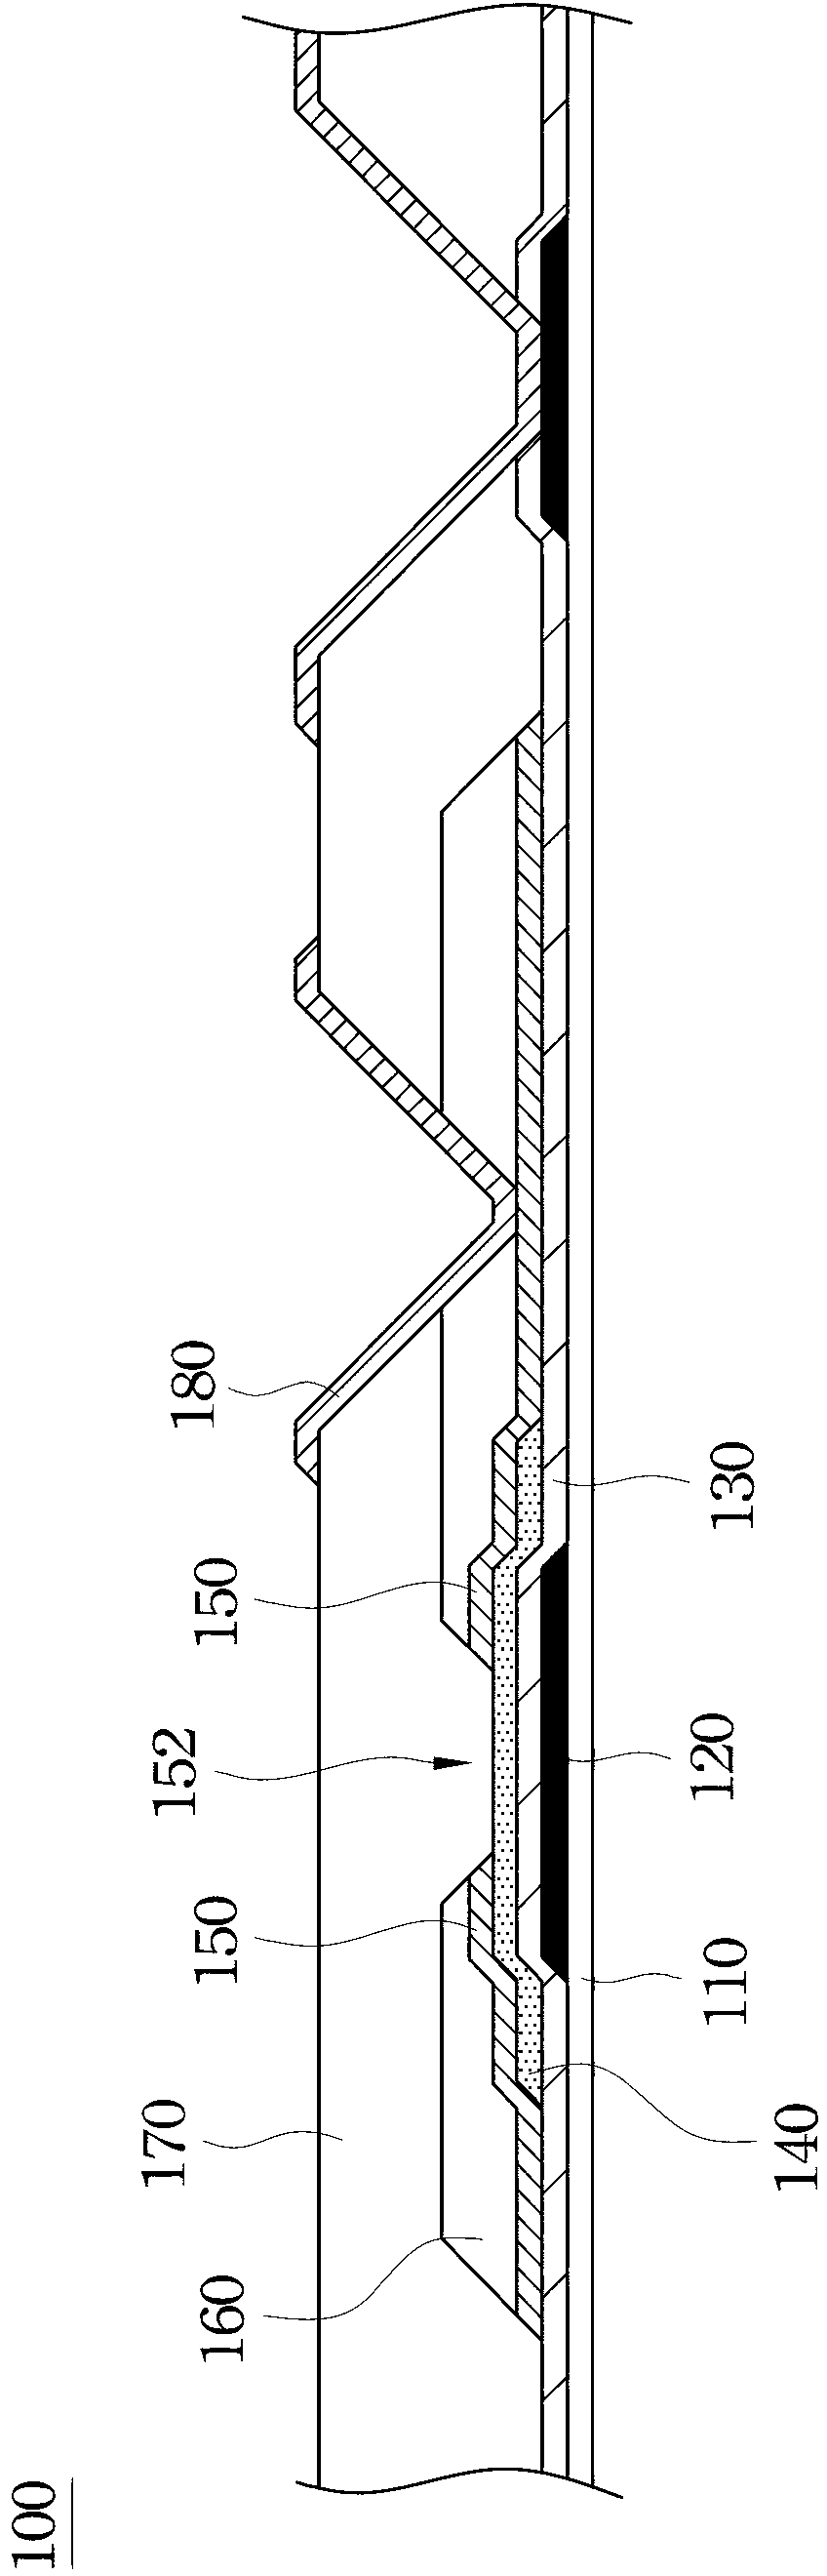 Thin film transistor array substrate, method for manufacturing the same, and annealing oven for performing the same method